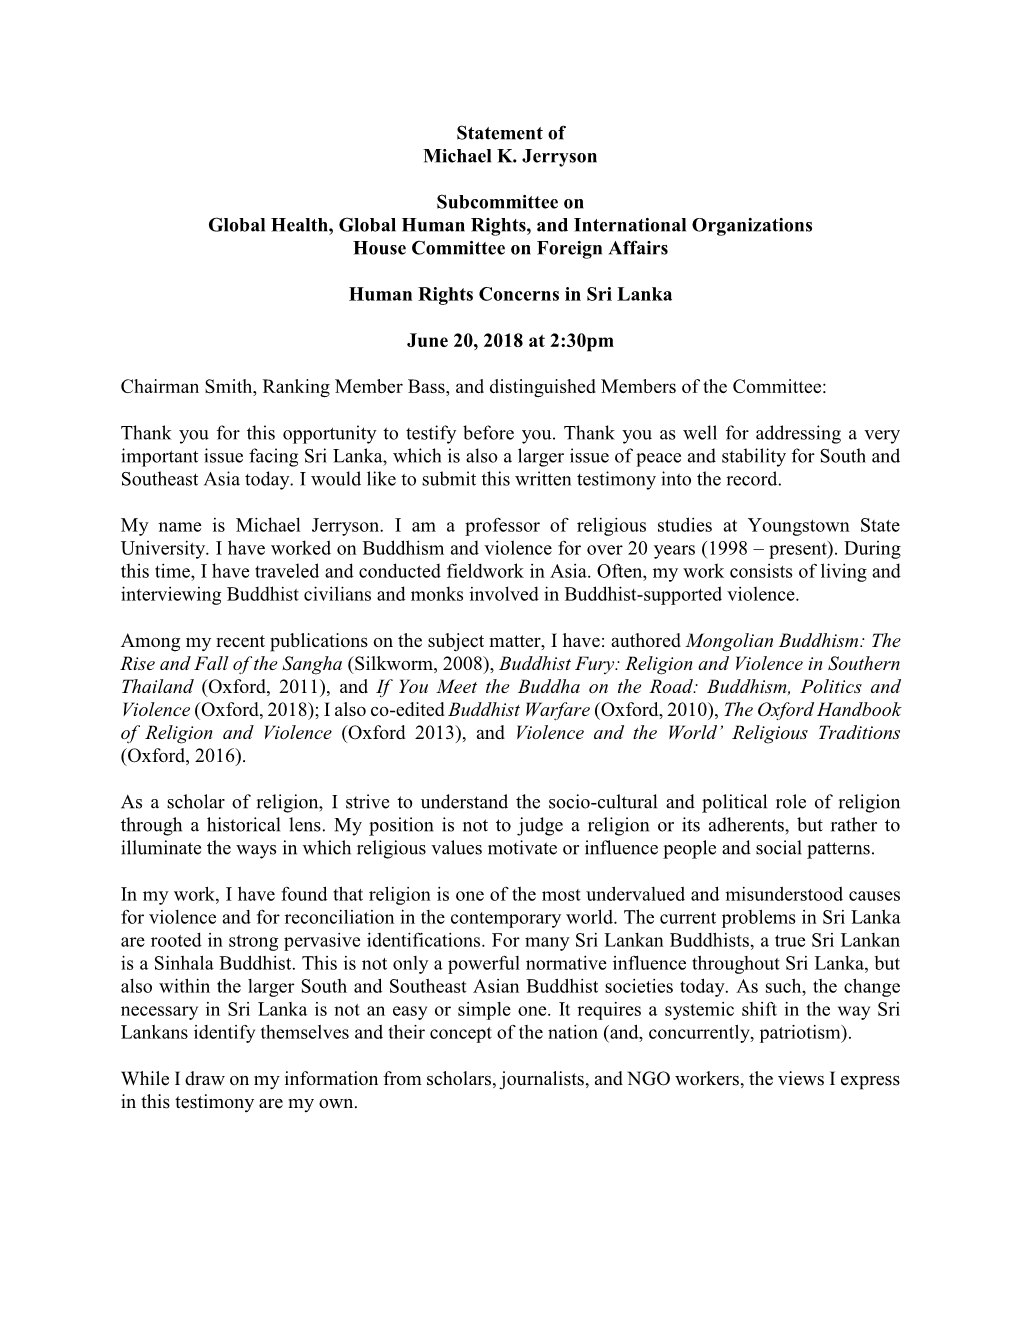 Statement of Michael K. Jerryson Subcommittee on Global Health